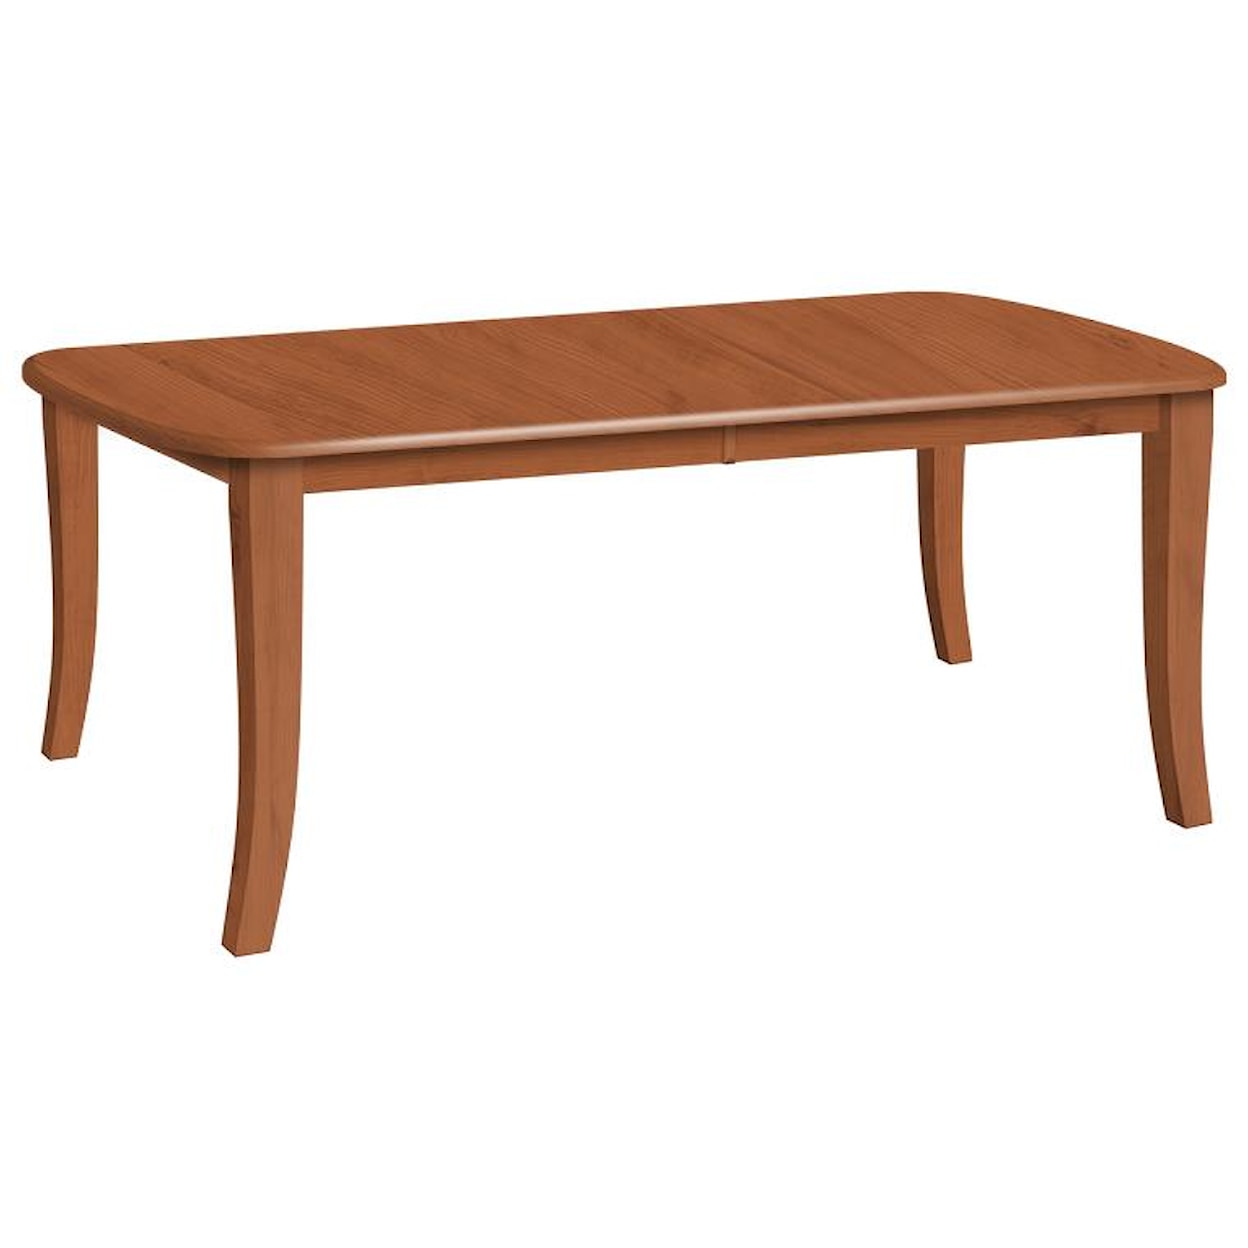 Daniels Amish Leg Customizable Solid Wood Dining Table